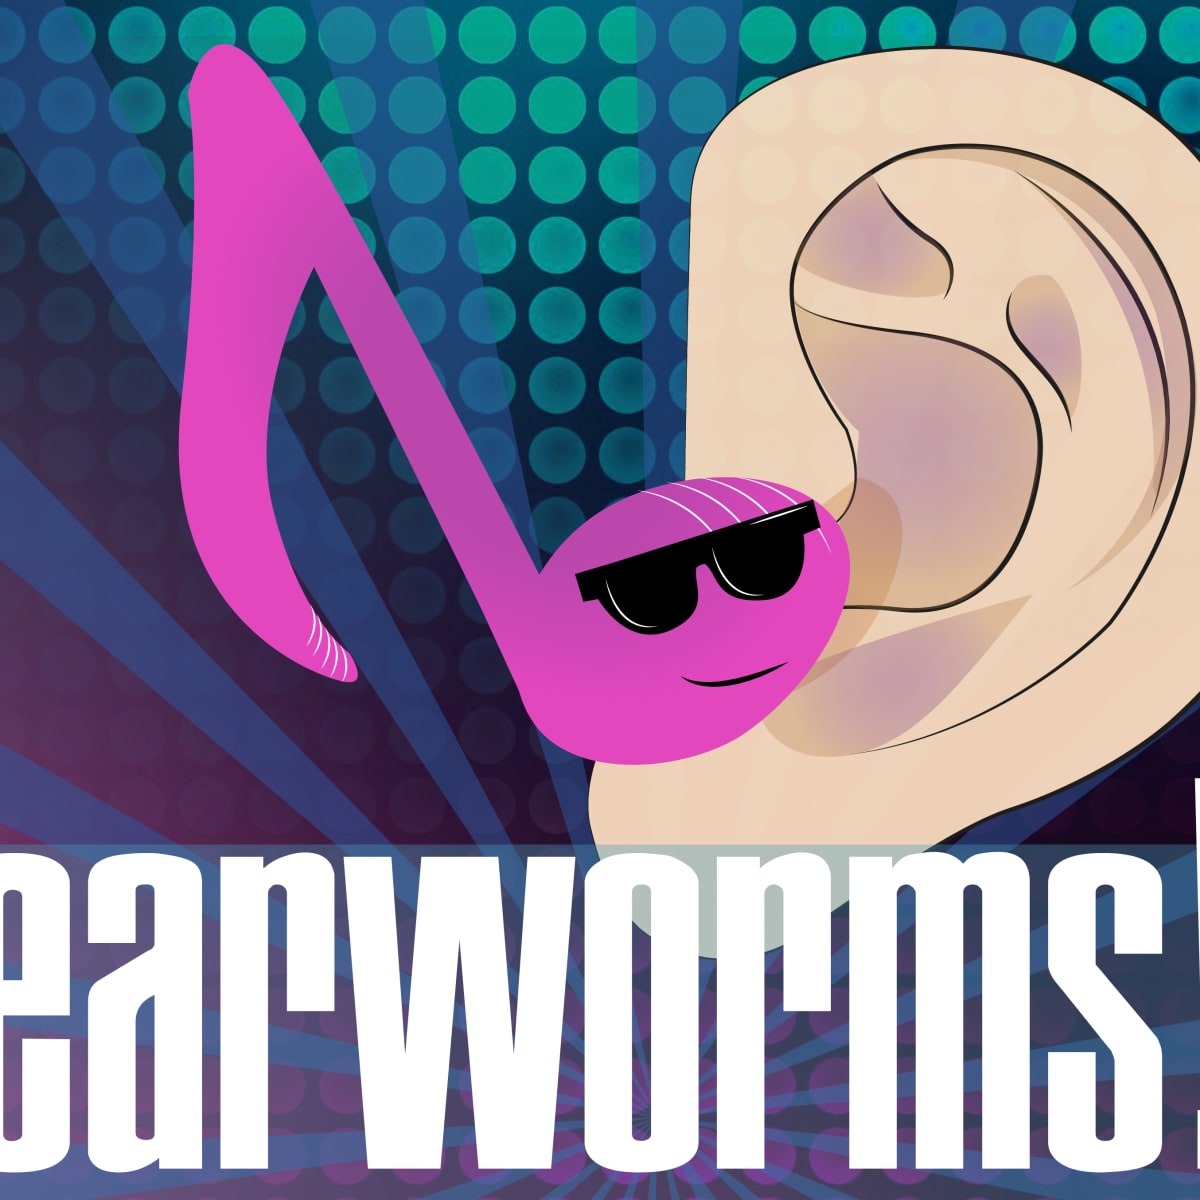 Top Ten Earworms Songs That Get Stuck In Your Head Spinditty